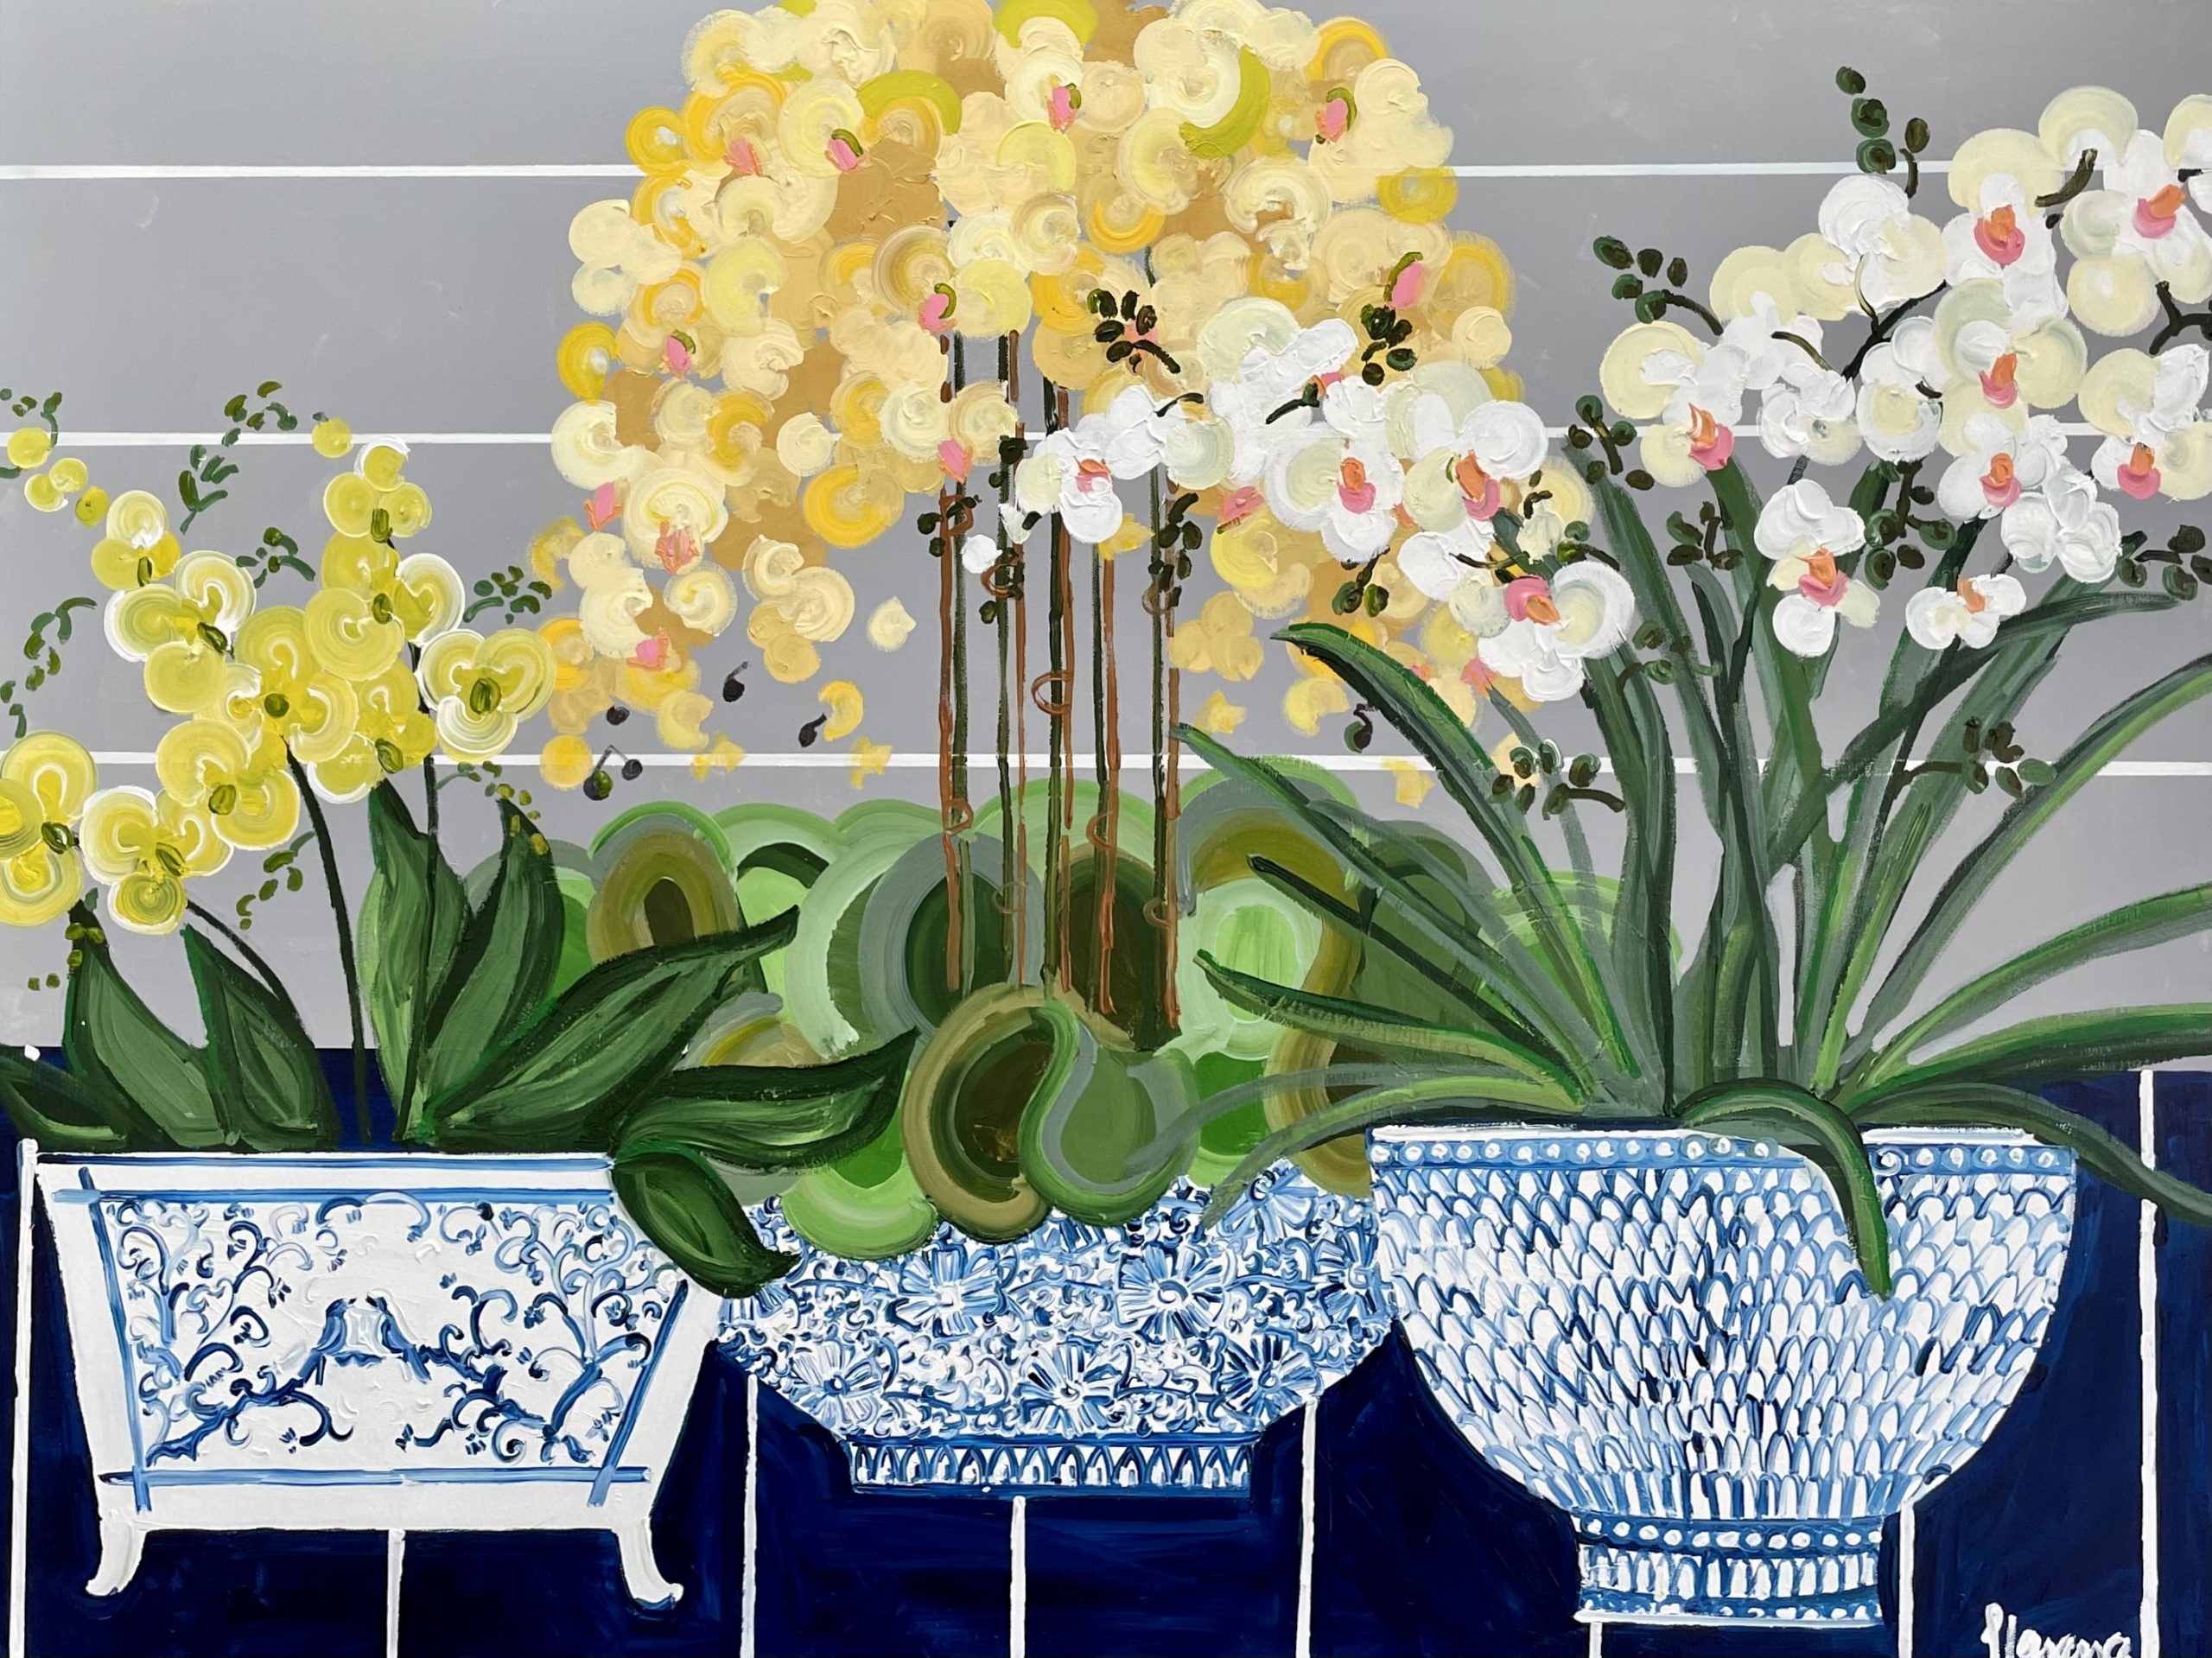 A painting of three yellow orchids.